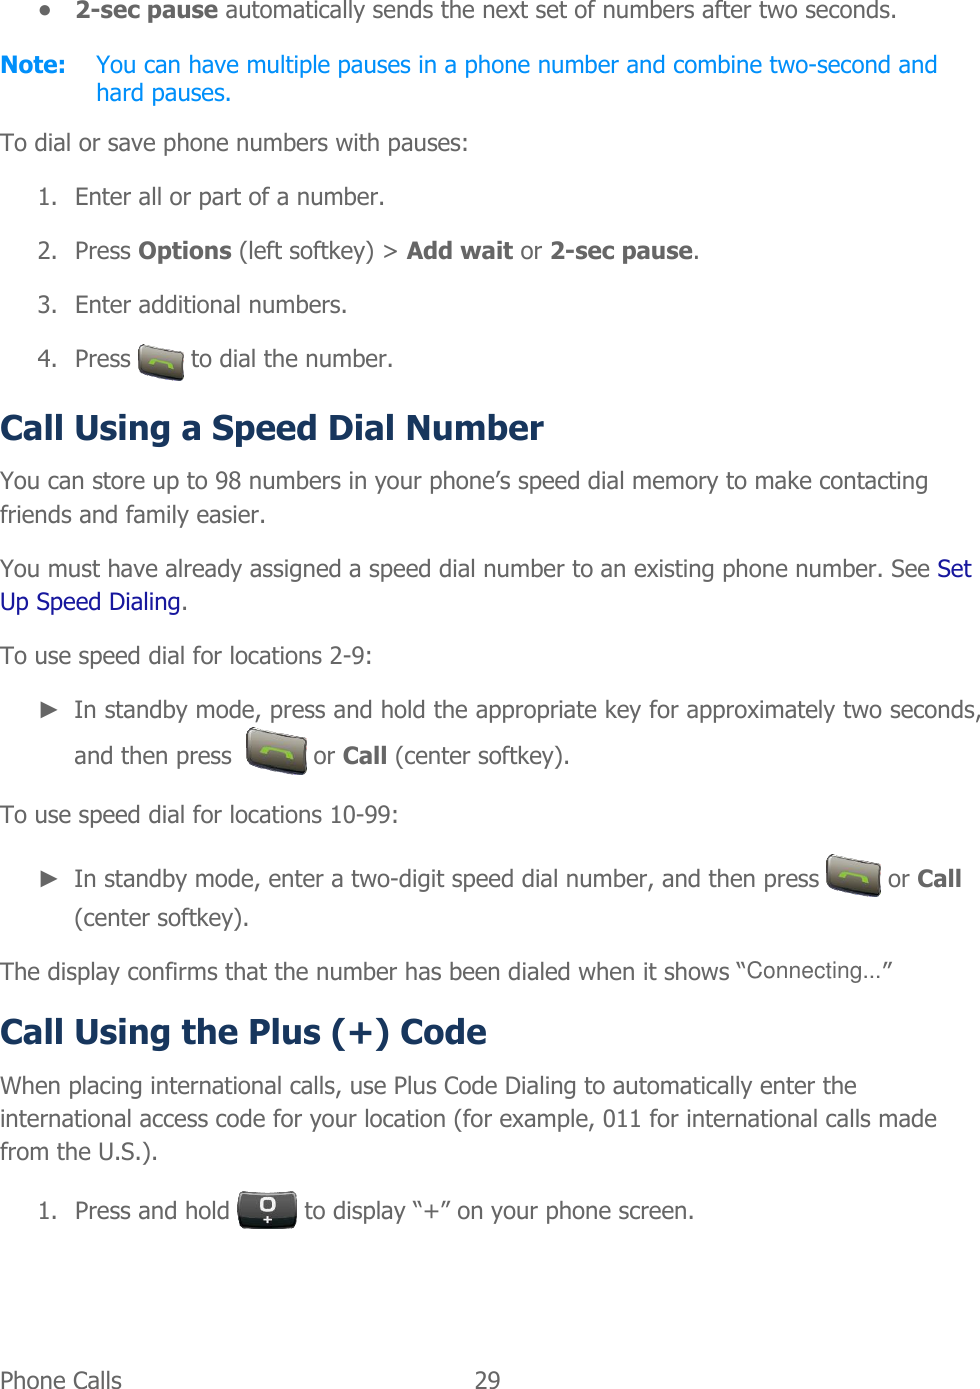  Phone Calls   29   ● 2-sec pause automatically sends the next set of numbers after two seconds. Note:  You can have multiple pauses in a phone number and combine two-second and hard pauses. To dial or save phone numbers with pauses: 1. Enter all or part of a number. 2. Press Options (left softkey) &gt; Add wait or 2-sec pause. 3. Enter additional numbers. 4. Press   to dial the number. Call Using a Speed Dial Number You can store up to 98 numbers in your phone’s speed dial memory to make contacting friends and family easier. You must have already assigned a speed dial number to an existing phone number. See Set Up Speed Dialing. To use speed dial for locations 2-9: ► In standby mode, press and hold the appropriate key for approximately two seconds, and then press    or Call (center softkey). To use speed dial for locations 10-99: ► In standby mode, enter a two-digit speed dial number, and then press   or Call (center softkey). The display confirms that the number has been dialed when it shows “Connecting...” Call Using the Plus (+) Code When placing international calls, use Plus Code Dialing to automatically enter the international access code for your location (for example, 011 for international calls made from the U.S.). 1. Press and hold   to display “+” on your phone screen. 